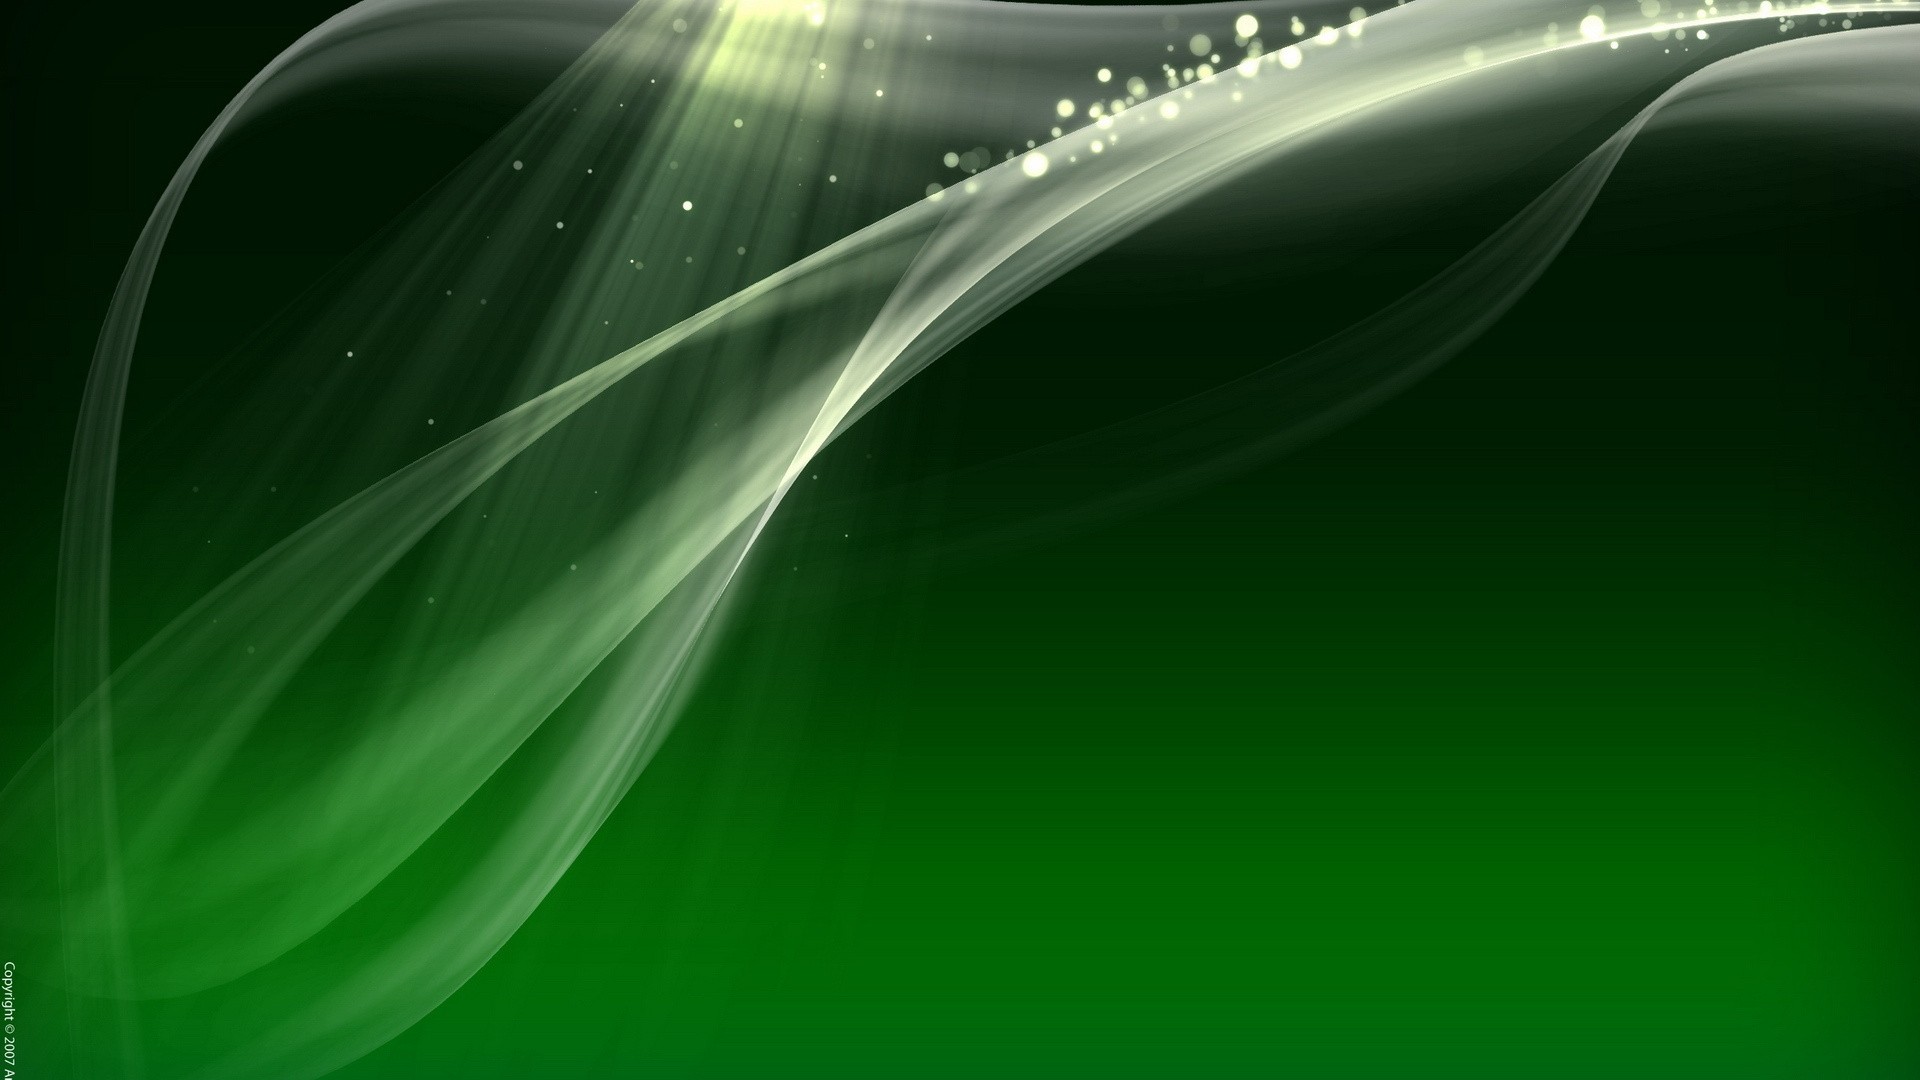 Green Abstract Wallpaper 1920x1080 Green Abstract White Waves 1920x1080